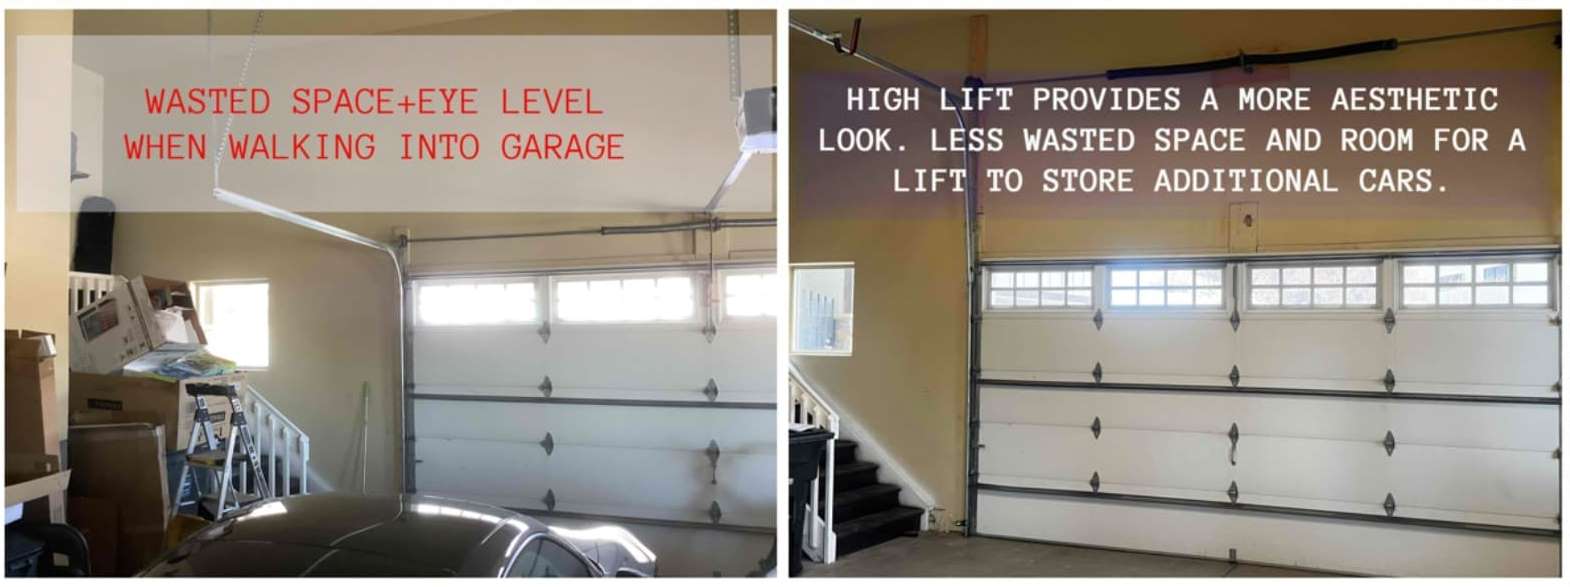 high lift images